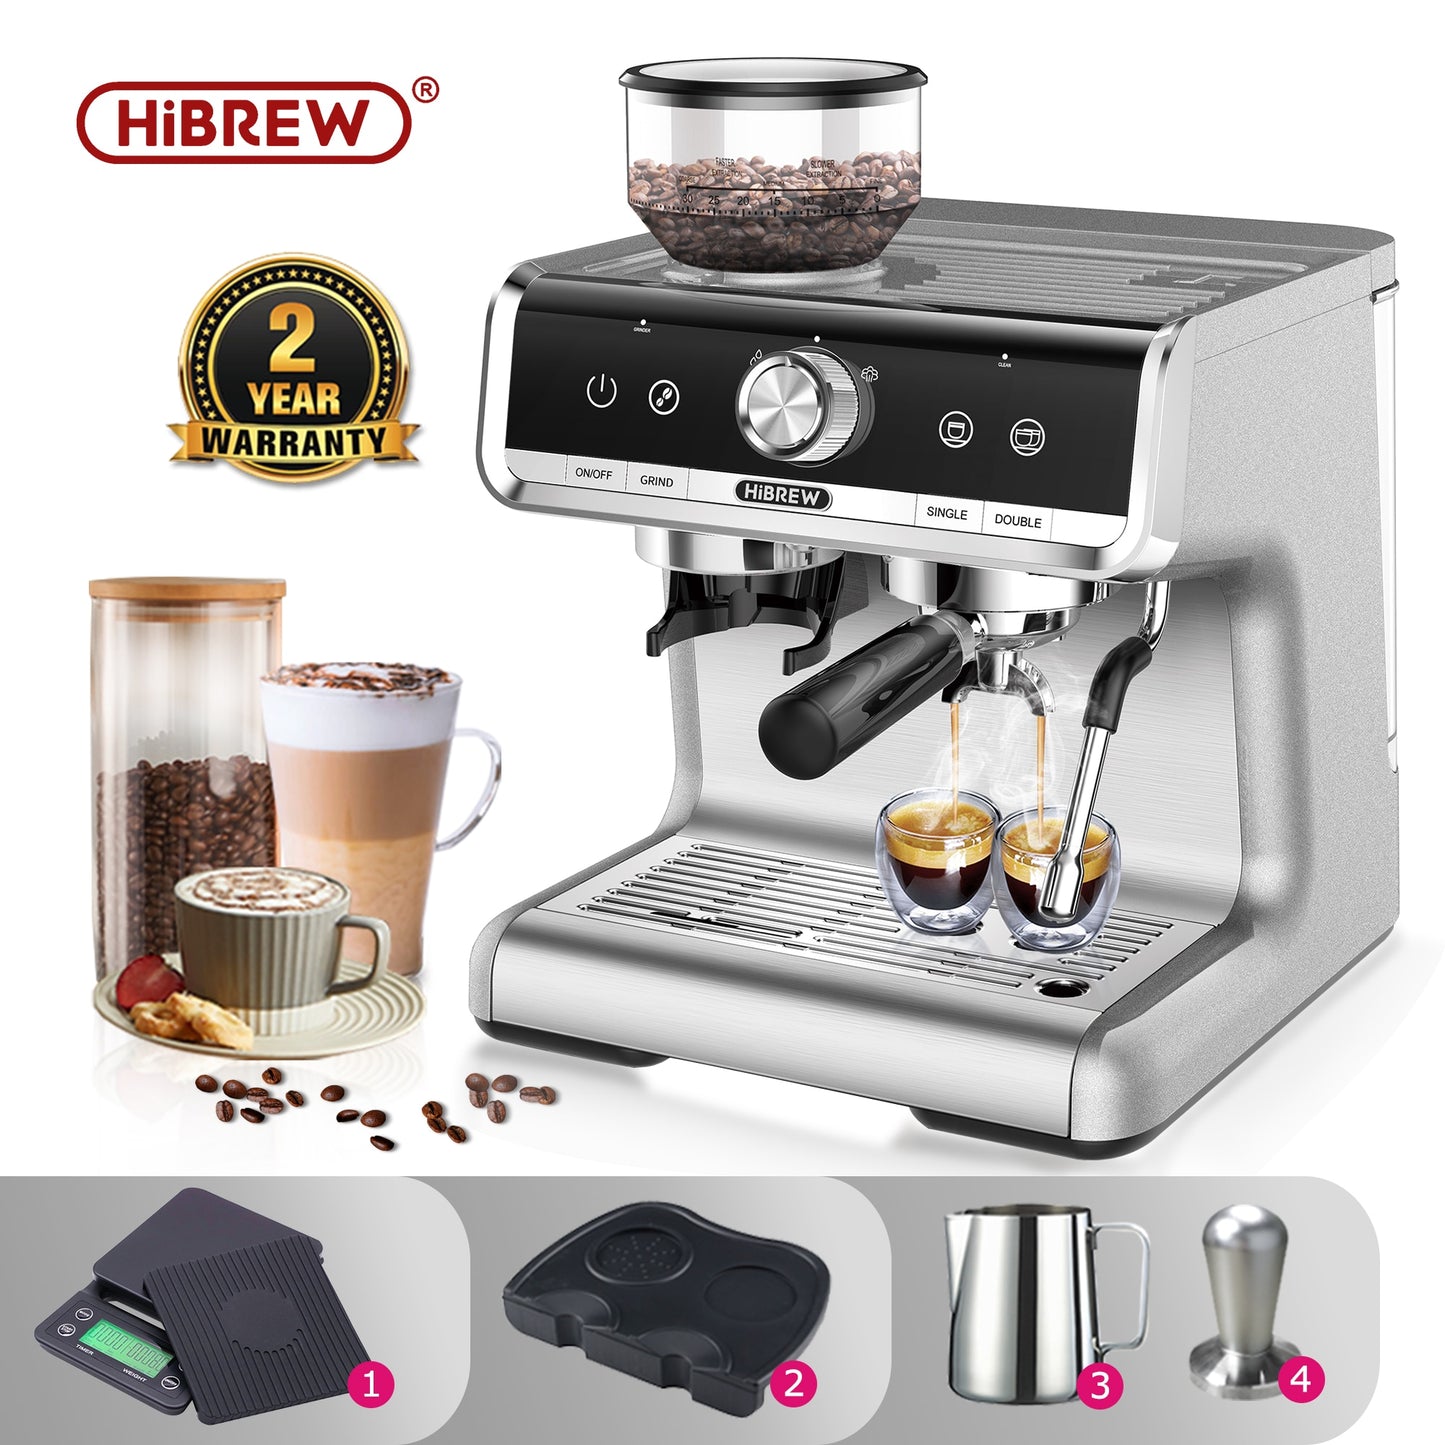 HiBREW  Barista Pro 19Bar Bean to Espresso,Cafetera  Commercial Level Coffee Machine with Full Kit for Cafe Hotel Restaurant H7